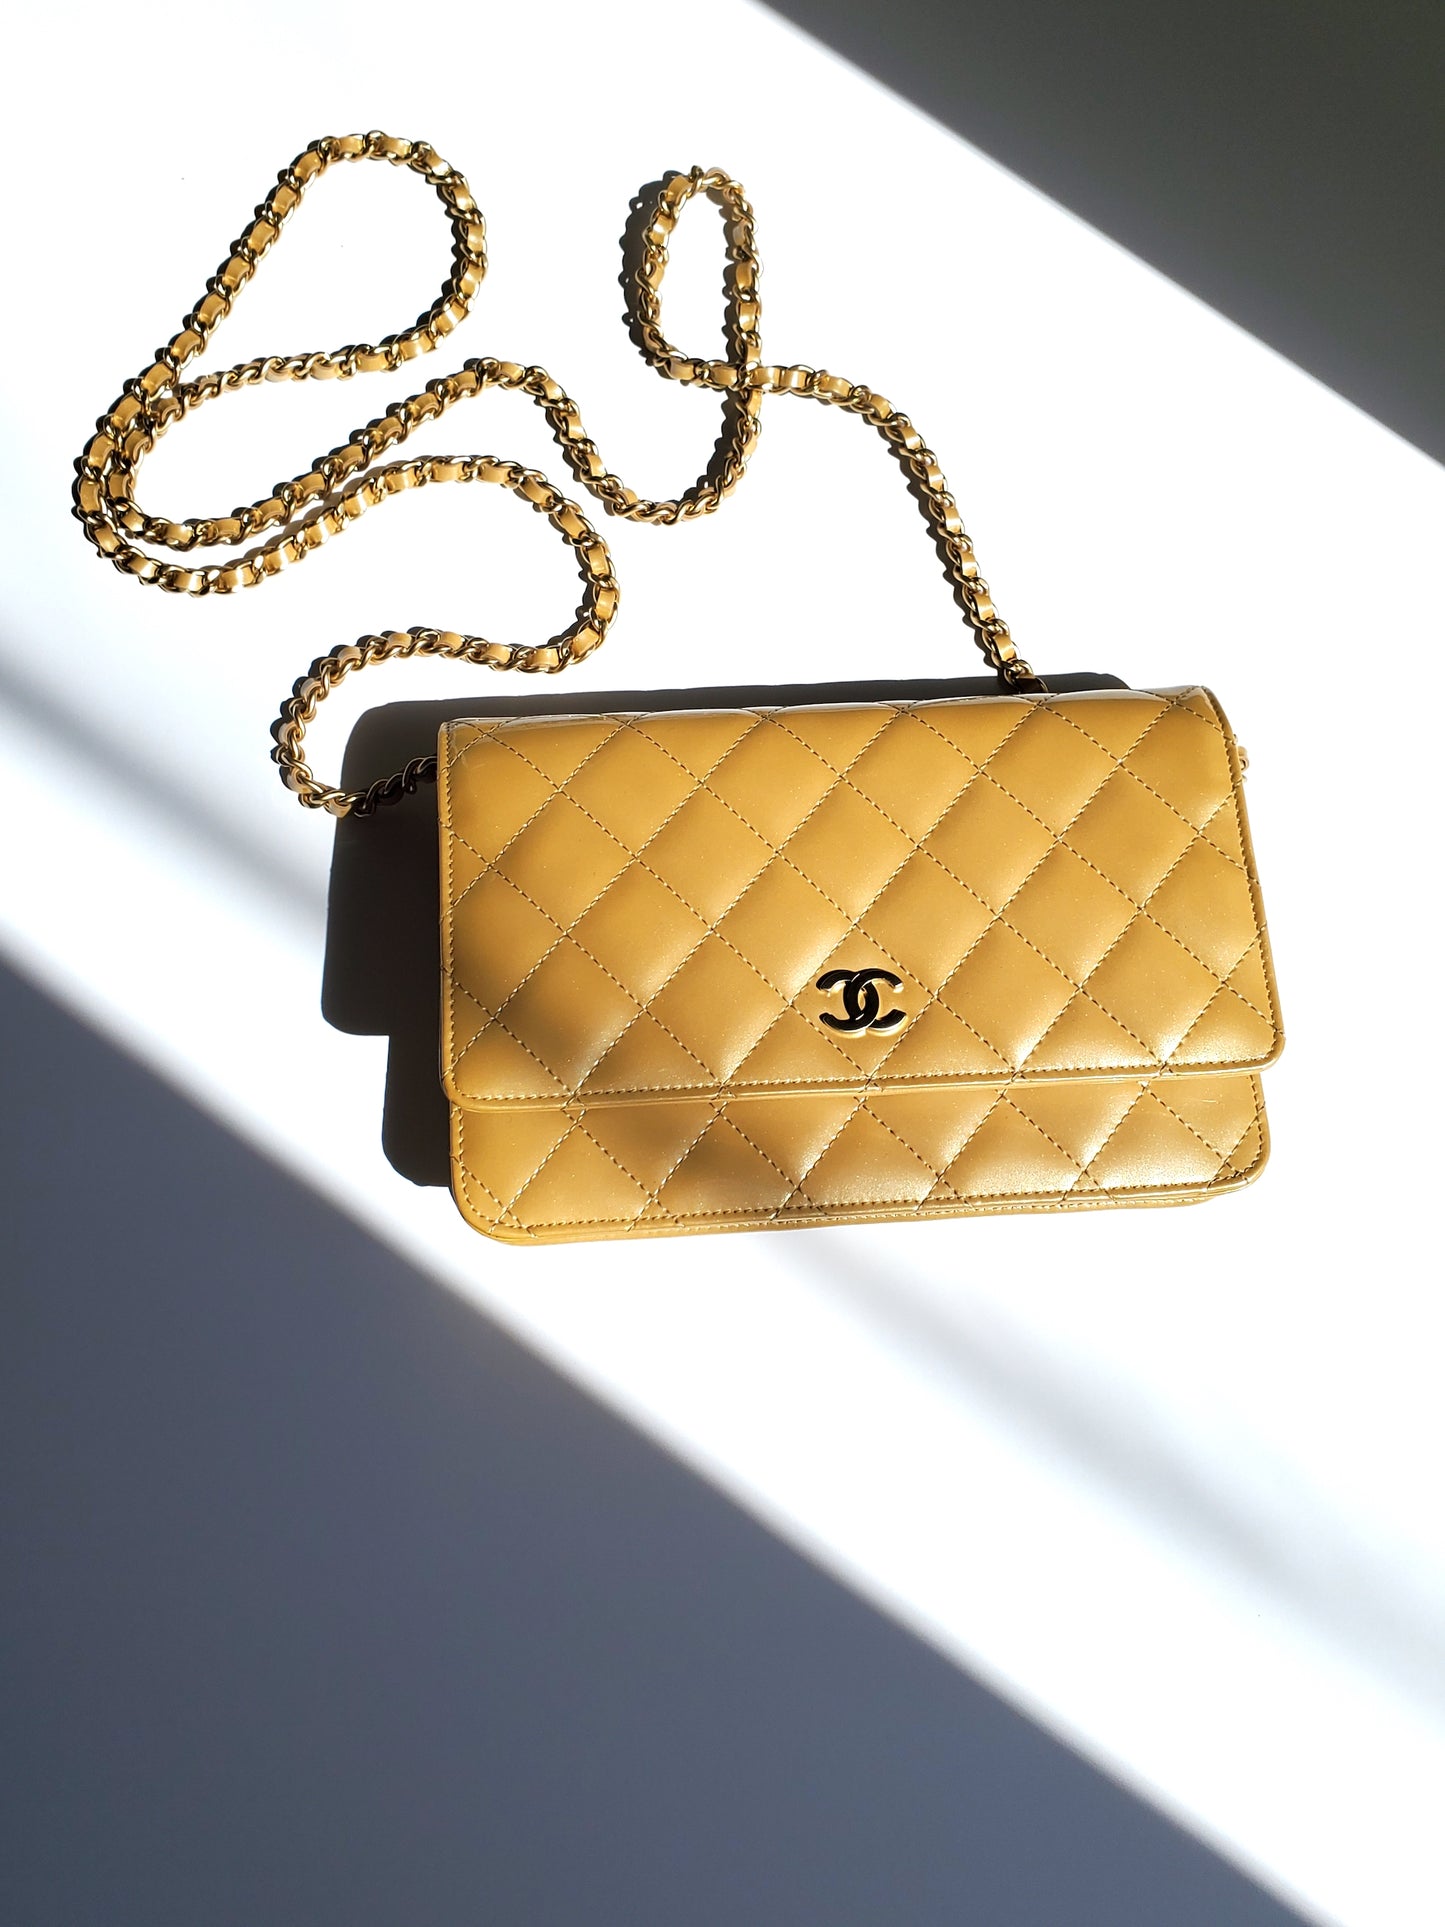 CHANEL Wallet on the Chain Bag